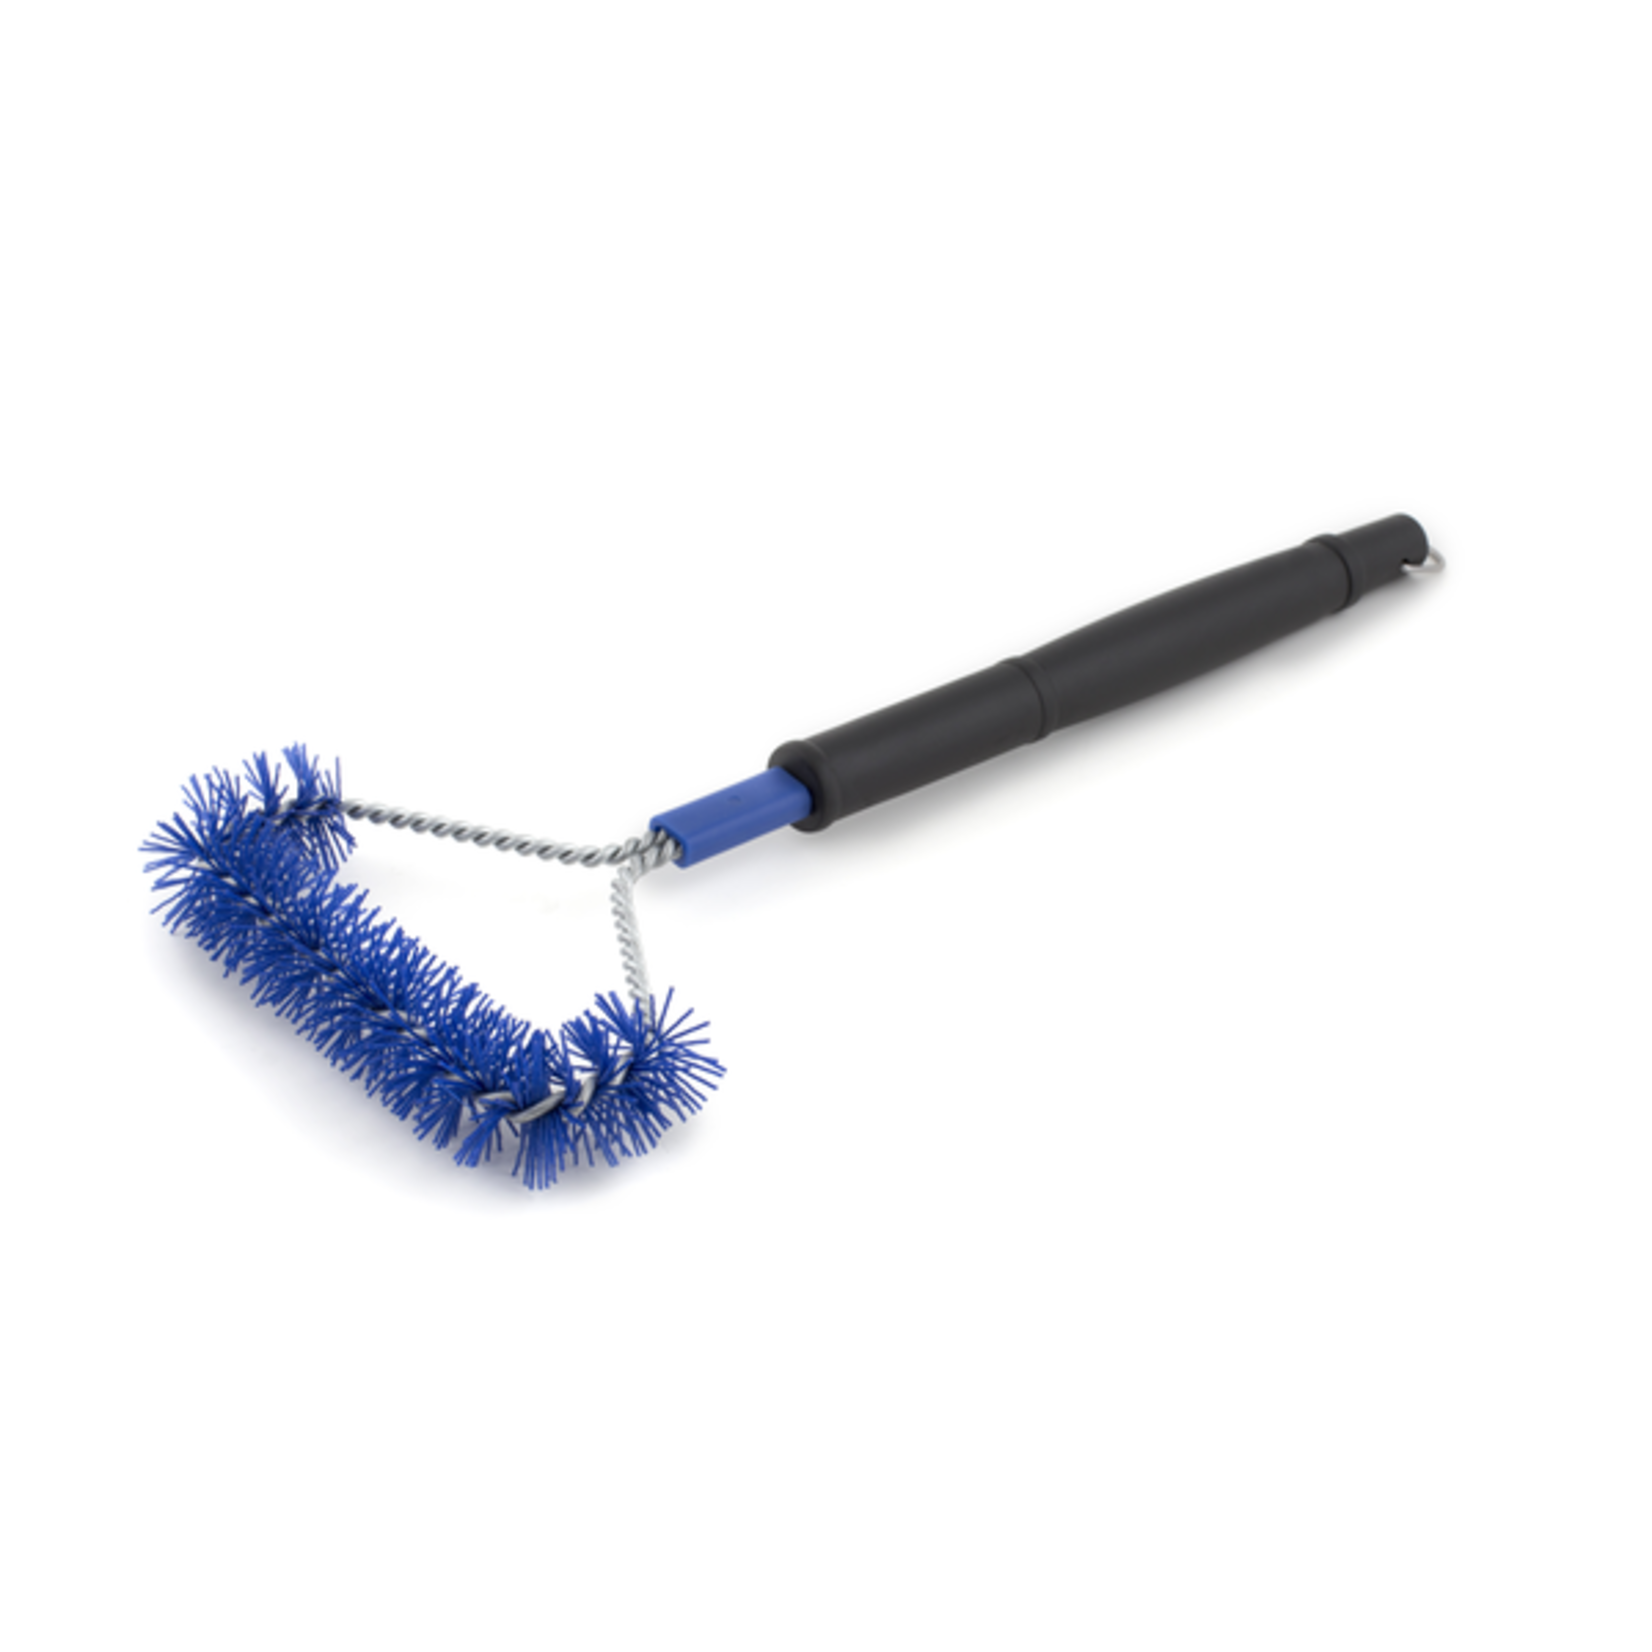 GrillPro Extra Wide Nylon Grill Brush